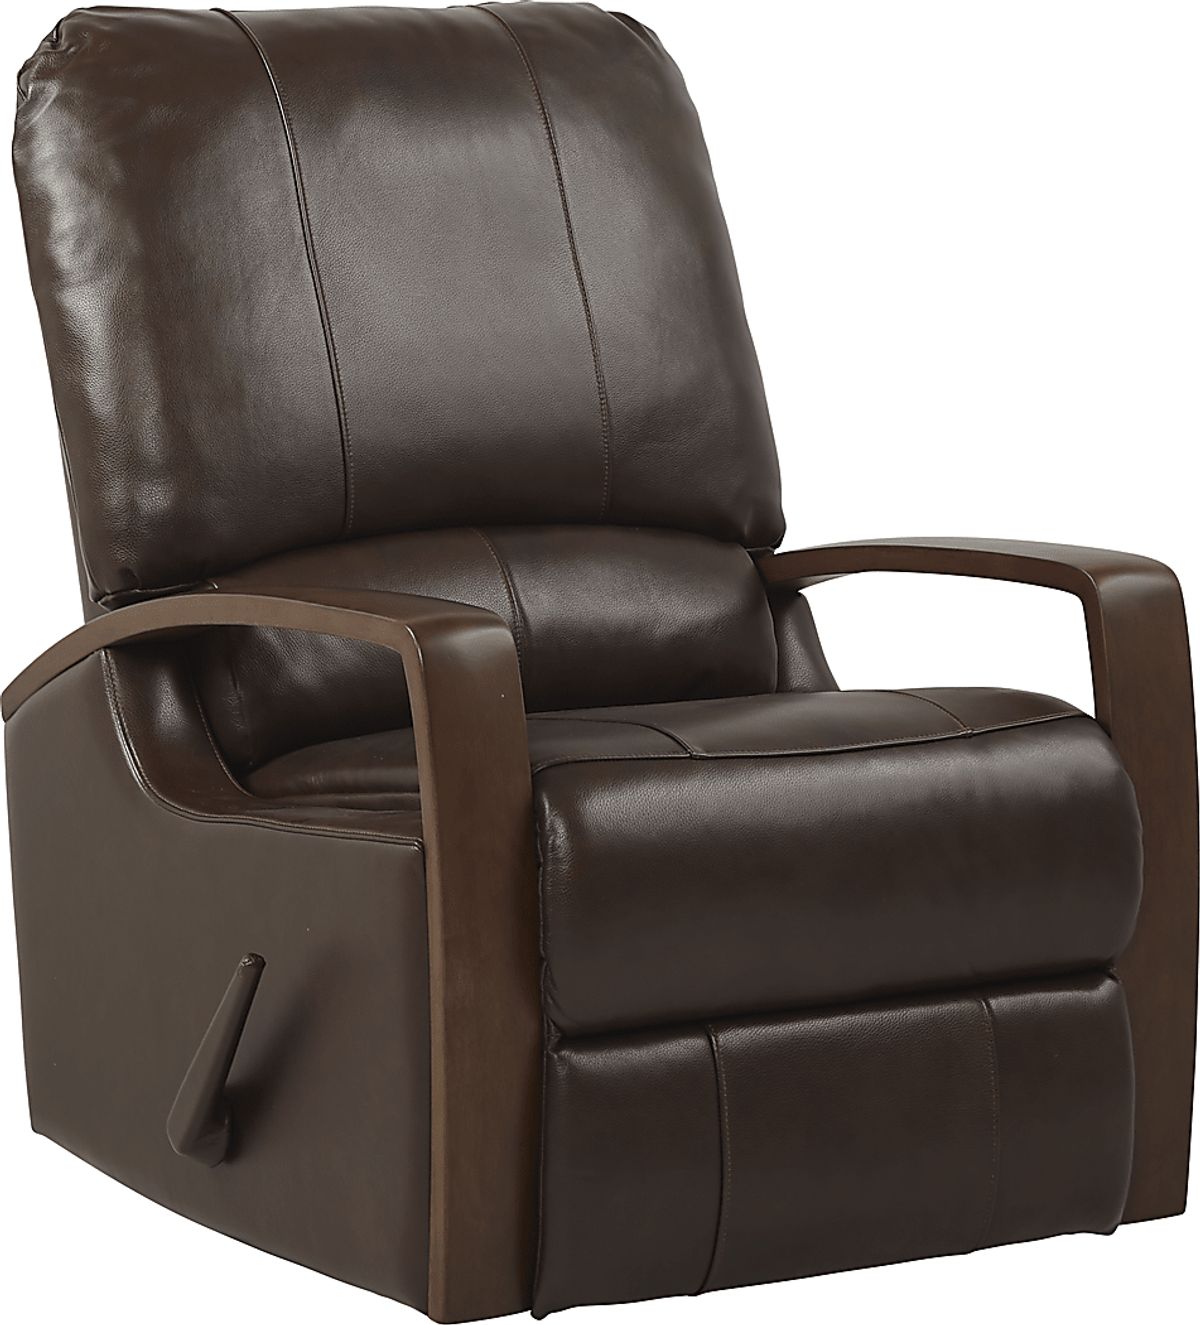 https://assets.roomstogo.com/product/heston-brown-leather-swivel-recliner_18513502_image-item?cache-id=11589de30a05b3a93f1a61bd2c583882&w=1200